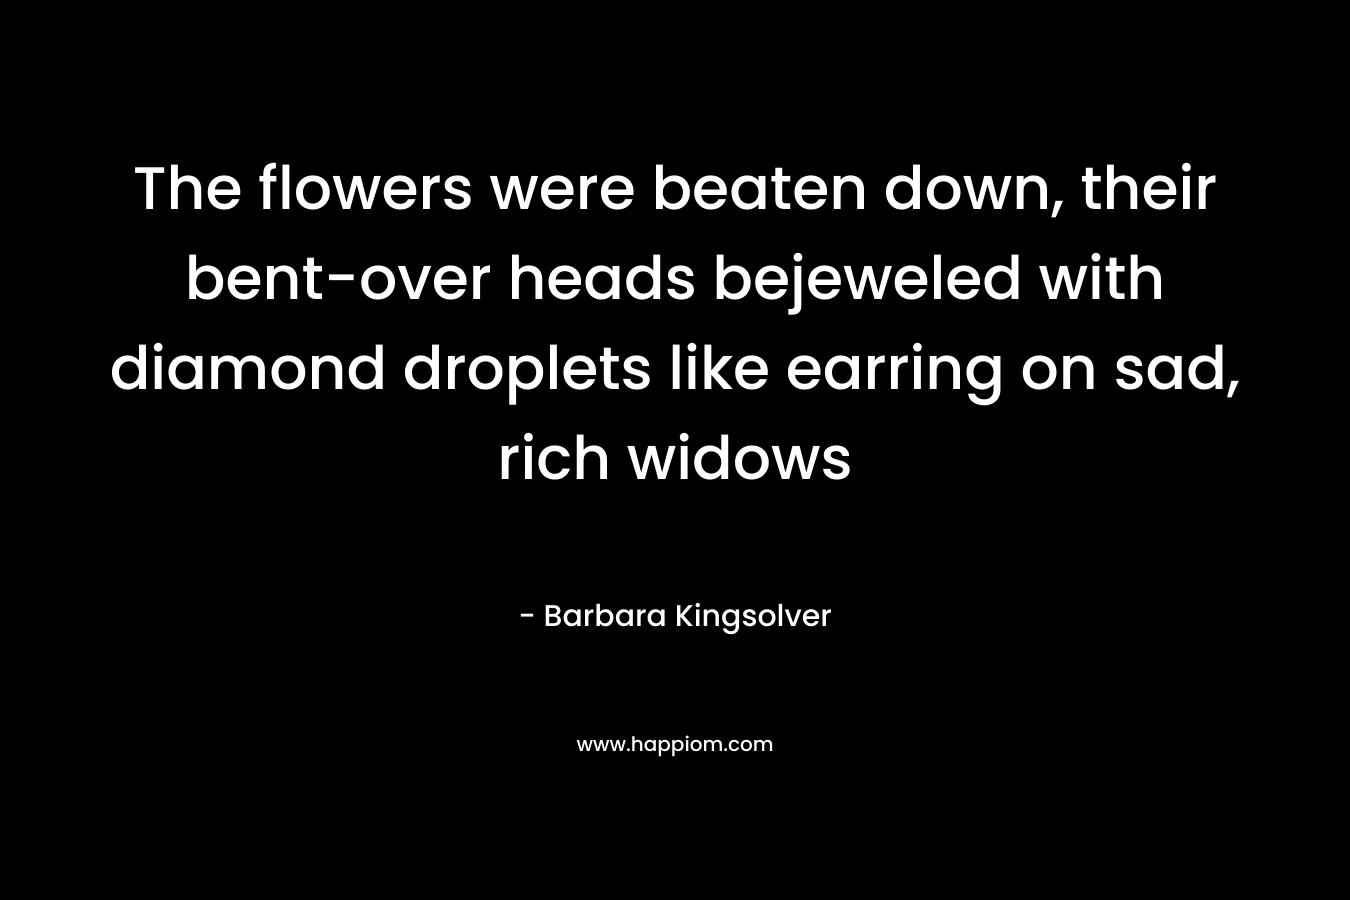 The flowers were beaten down, their bent-over heads bejeweled with diamond droplets like earring on sad, rich widows – Barbara Kingsolver